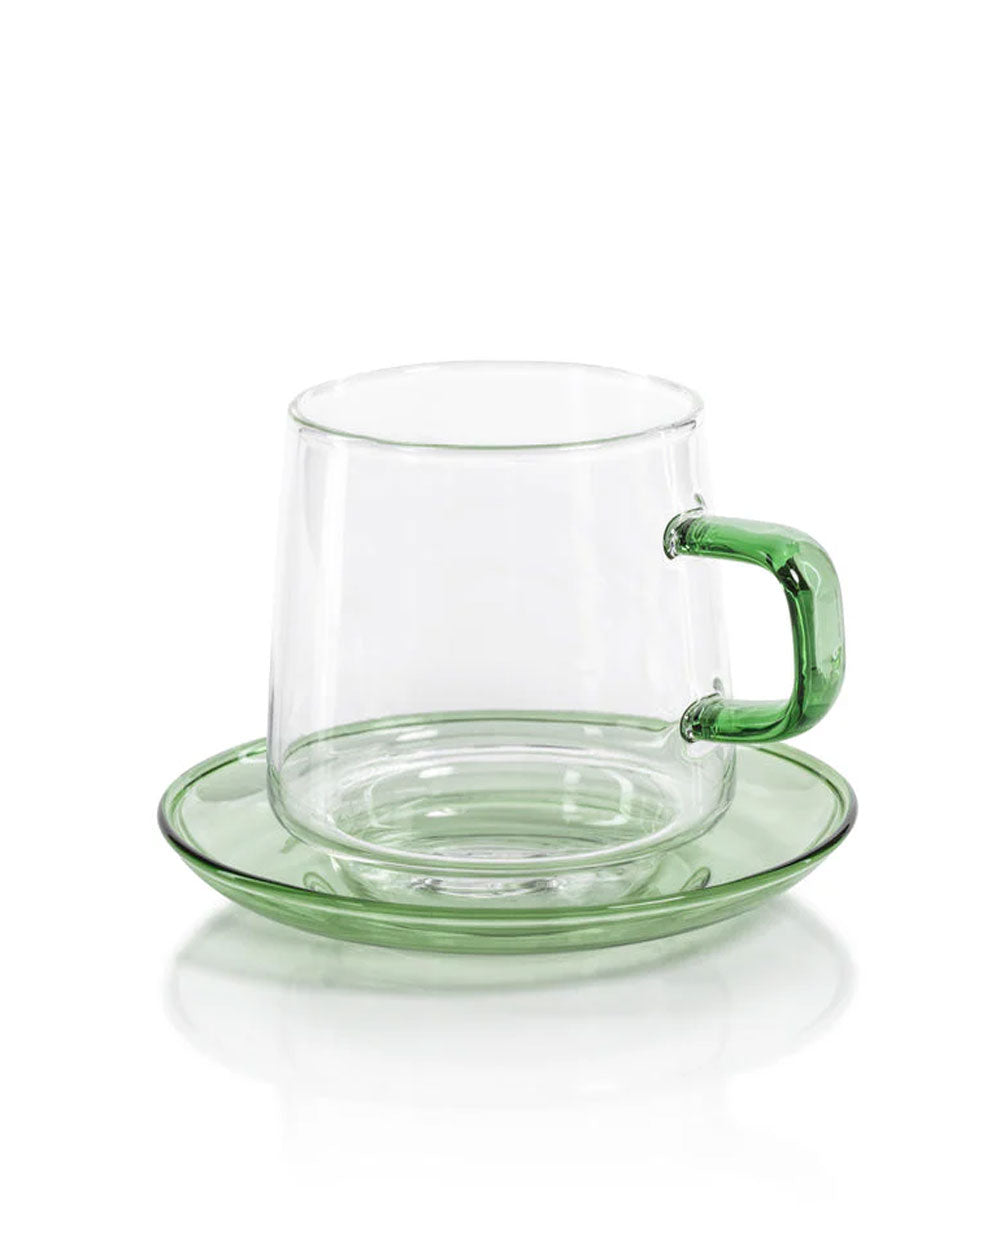 Baglioni Glass Tea and Coffee Cup with Saucer in Green